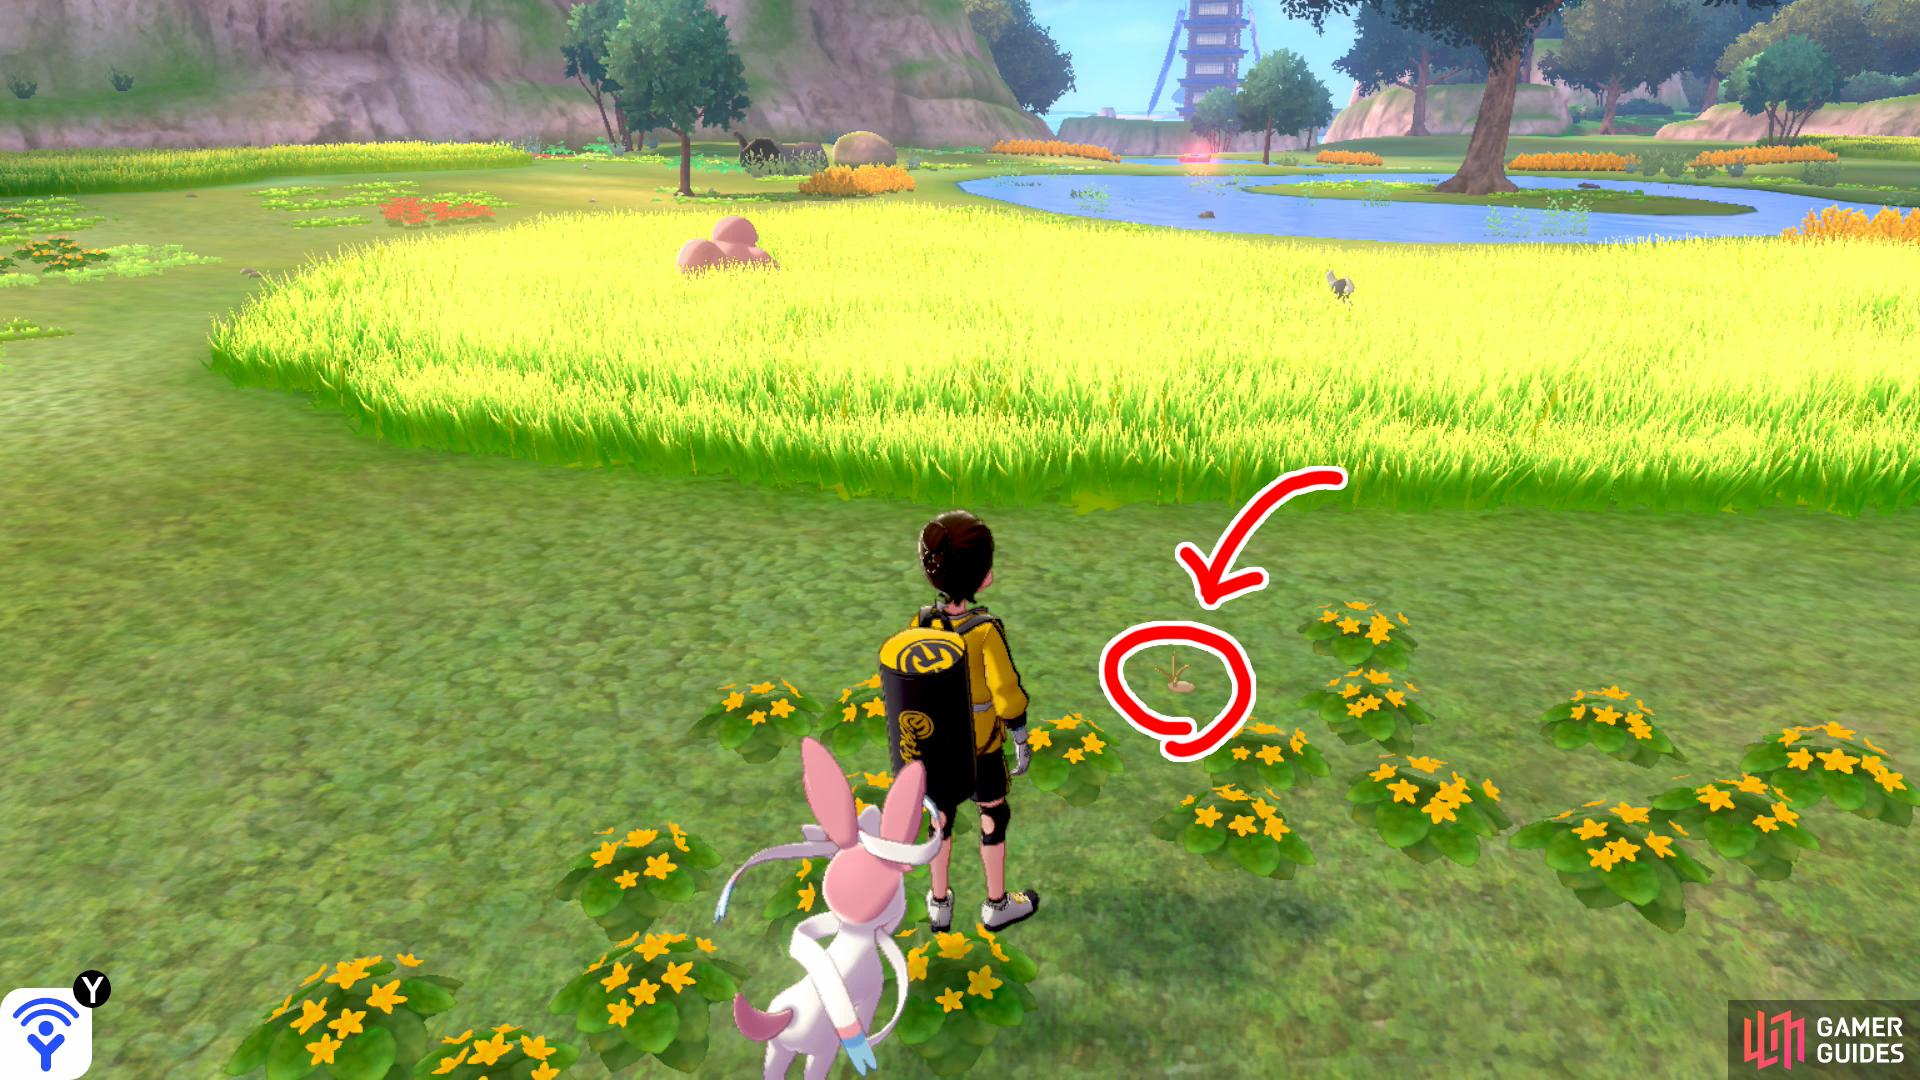 6/20: From the Fields of Honor entrance, turn left and go past the skinny tree. Keep to the right of the tall grass on the left. As the tall grass ends, there's a shallow pool on the right. Check the yellow flowers above the pool.